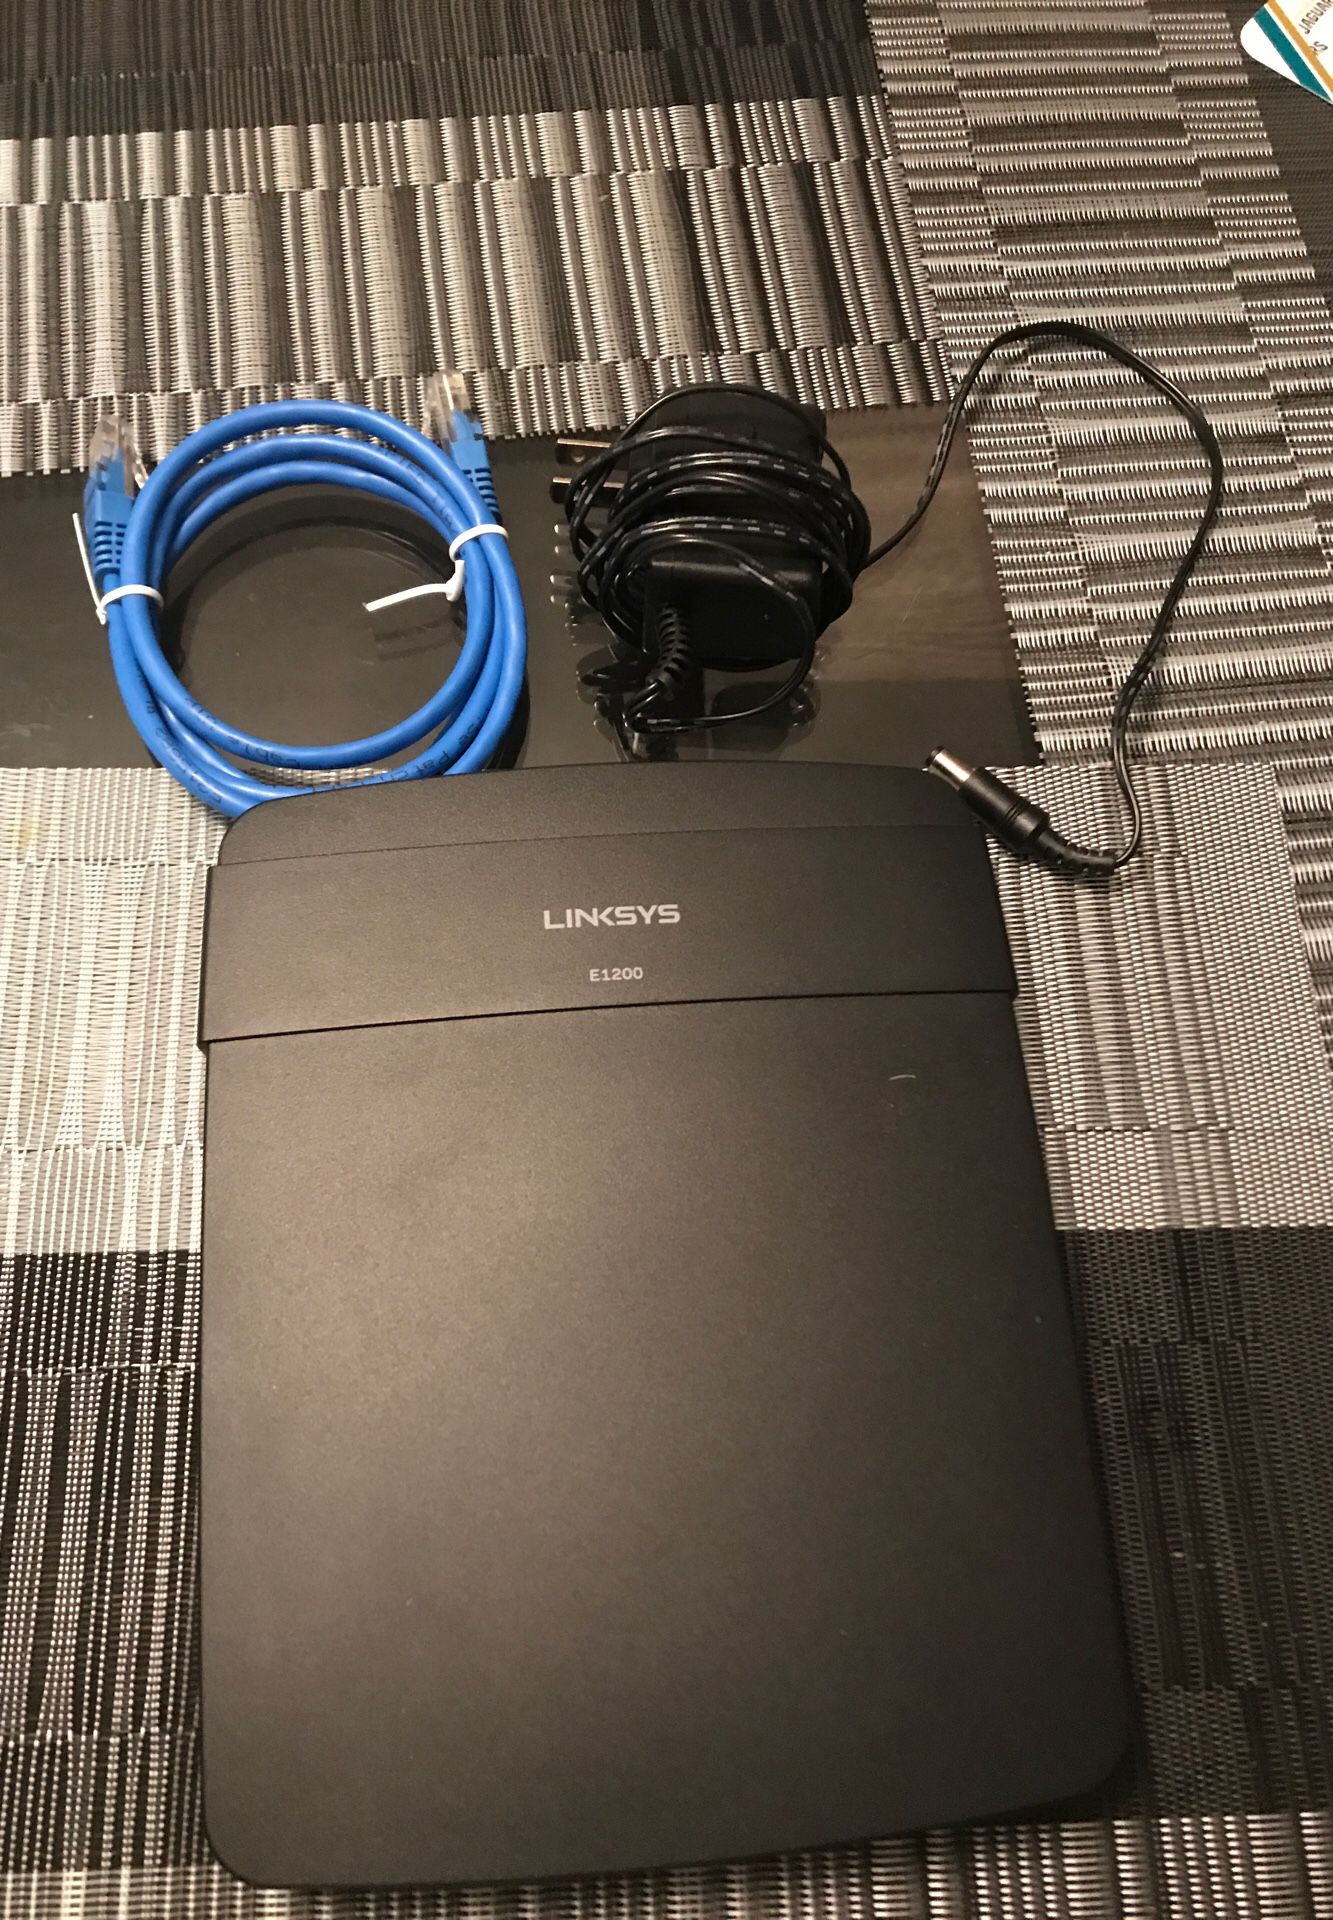 LINKSYS E1200 ROUTER